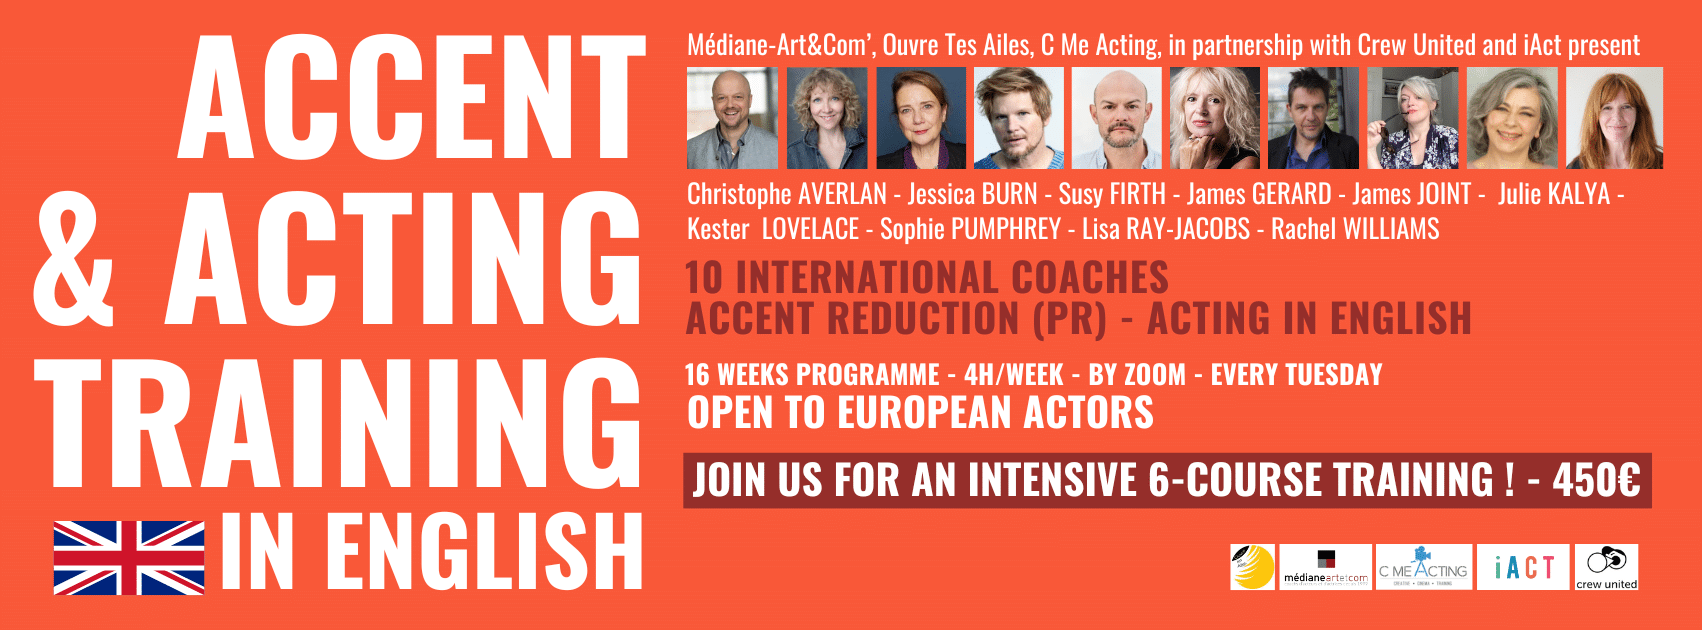 Accent & acting training in english Médiane-Art&Com’, Ouvre Tes Ailes, C Me Acting, in partnership with Crew United and iAct present 10 international coaches accent reduction (pr) & acting in english : Christophe AVERLAN - Jessica BURN - Susy FIRTH - James GERARD - James JOINT - Julie KALYA - Kester LOVELACE - Sophie PUMPHREY - Lisa RAY-JACOBS - Rachel WILLIAMS 16 weeks programme - 4h/week - by zoom - every Tuesday. Open tp european actors - JOIN US FOR AN INTENSIVE 6-course TRAINING ! - 450€